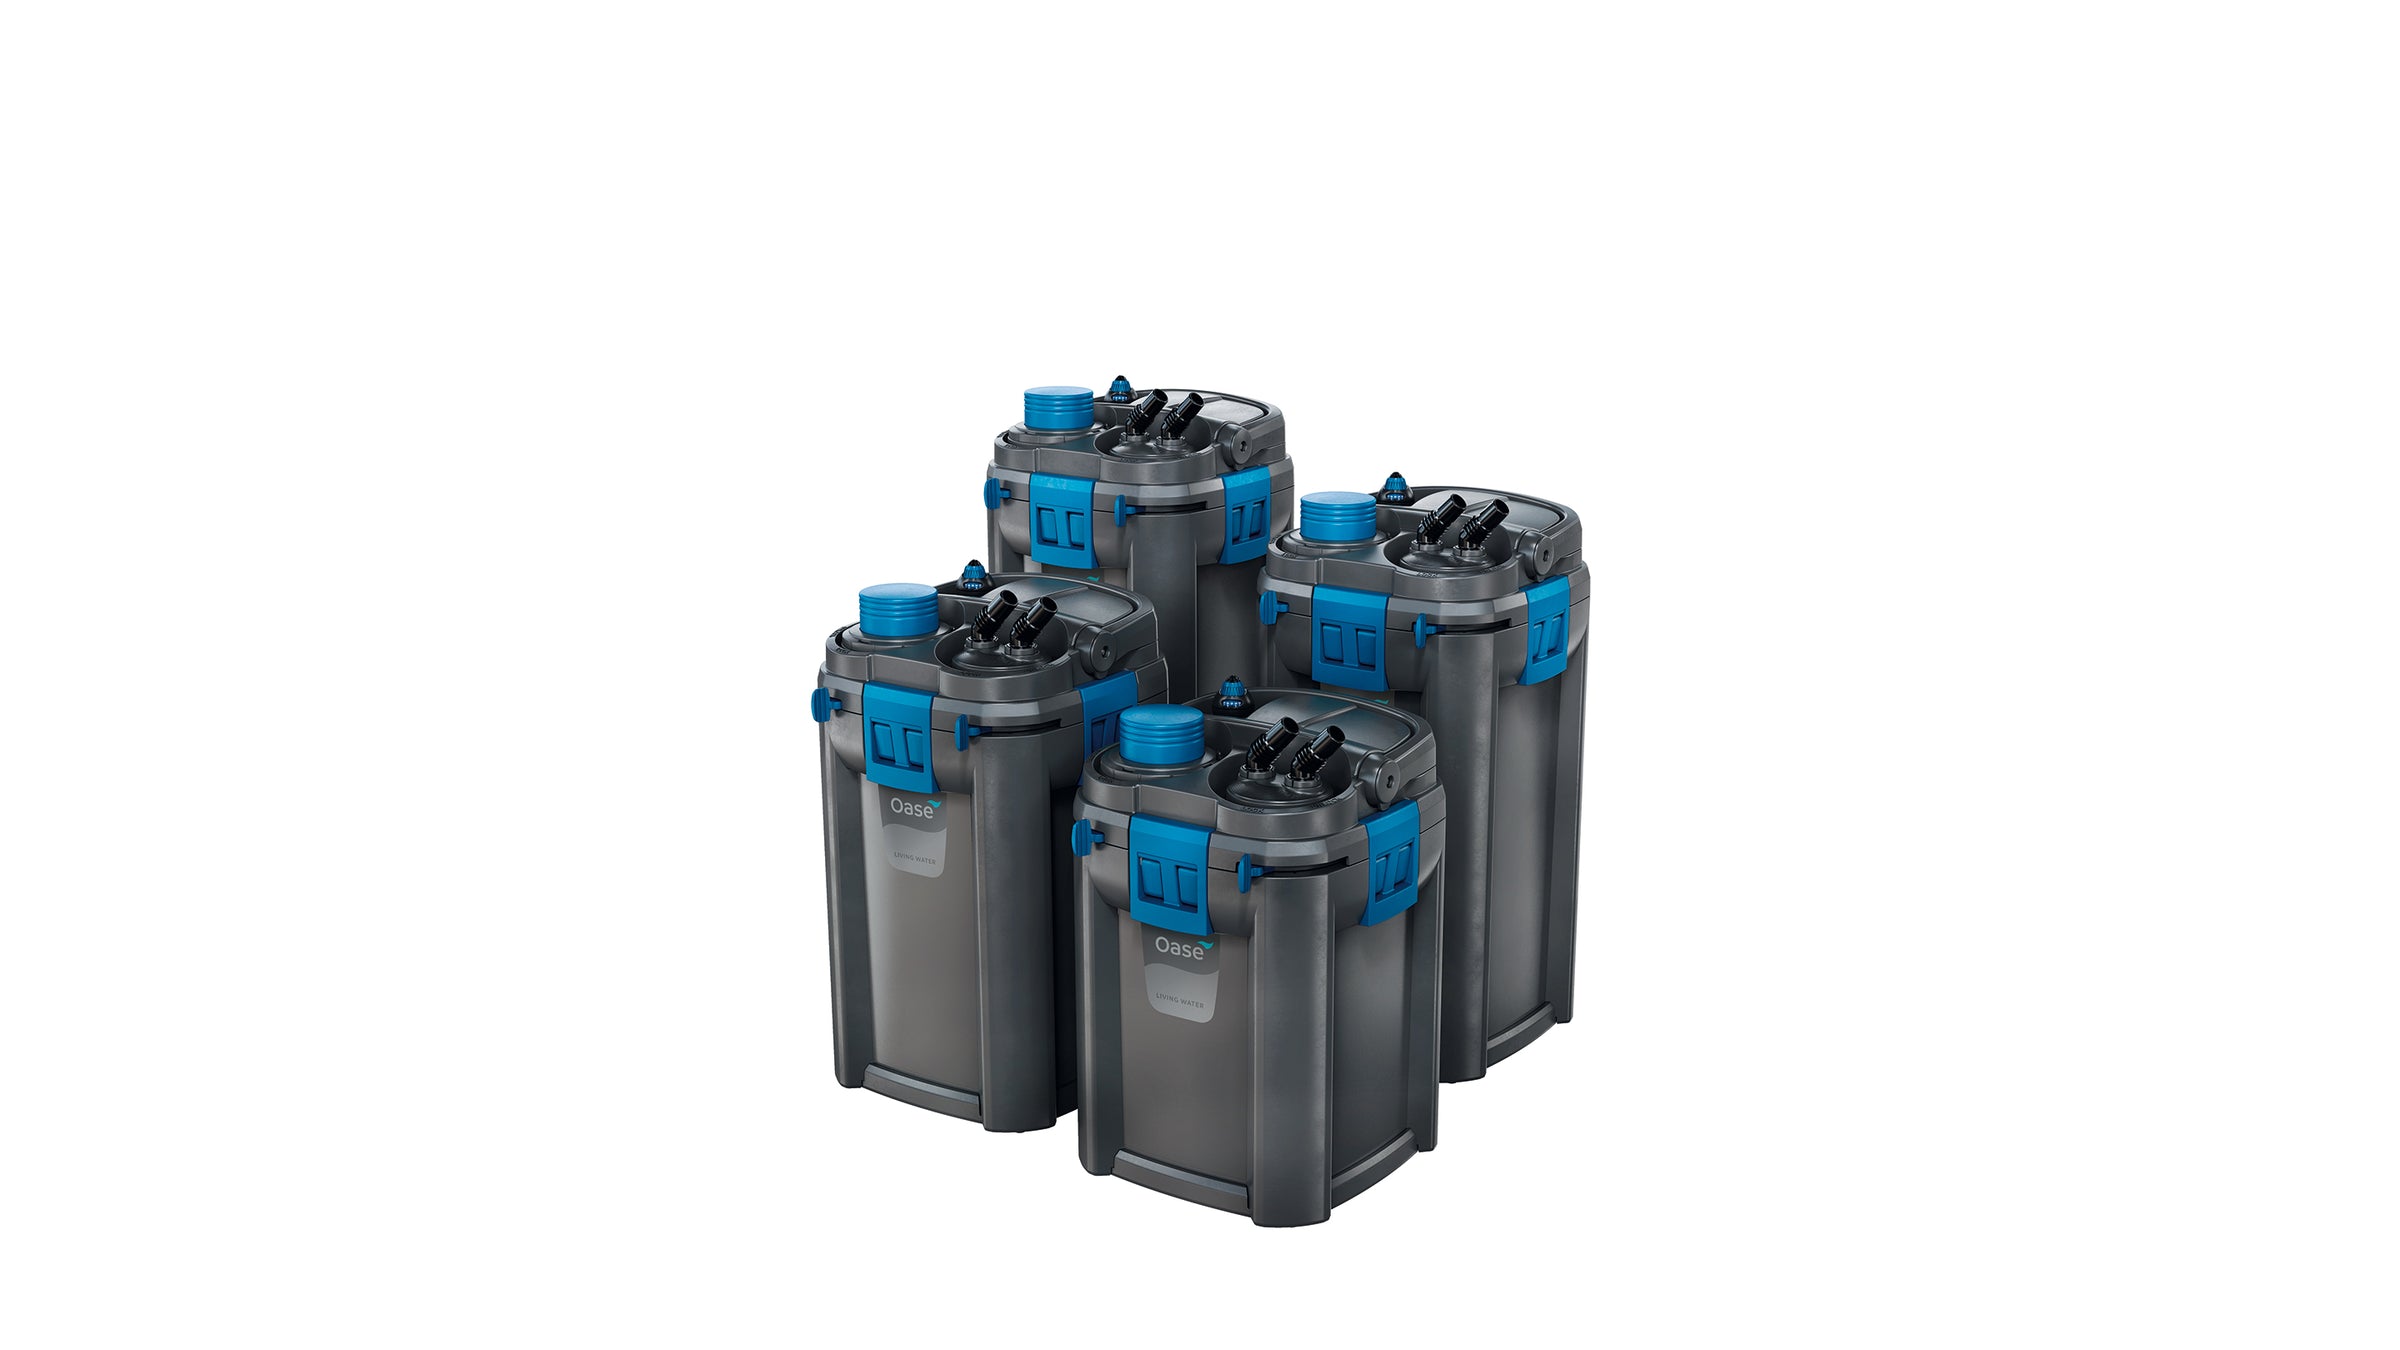 Buy aquarium filter, canister filter, hang on filter, filter media like activated carbon, ceramics ring, sponges, Lilly pipes, surface skimmer etc. online in Kathmandu Nepal 